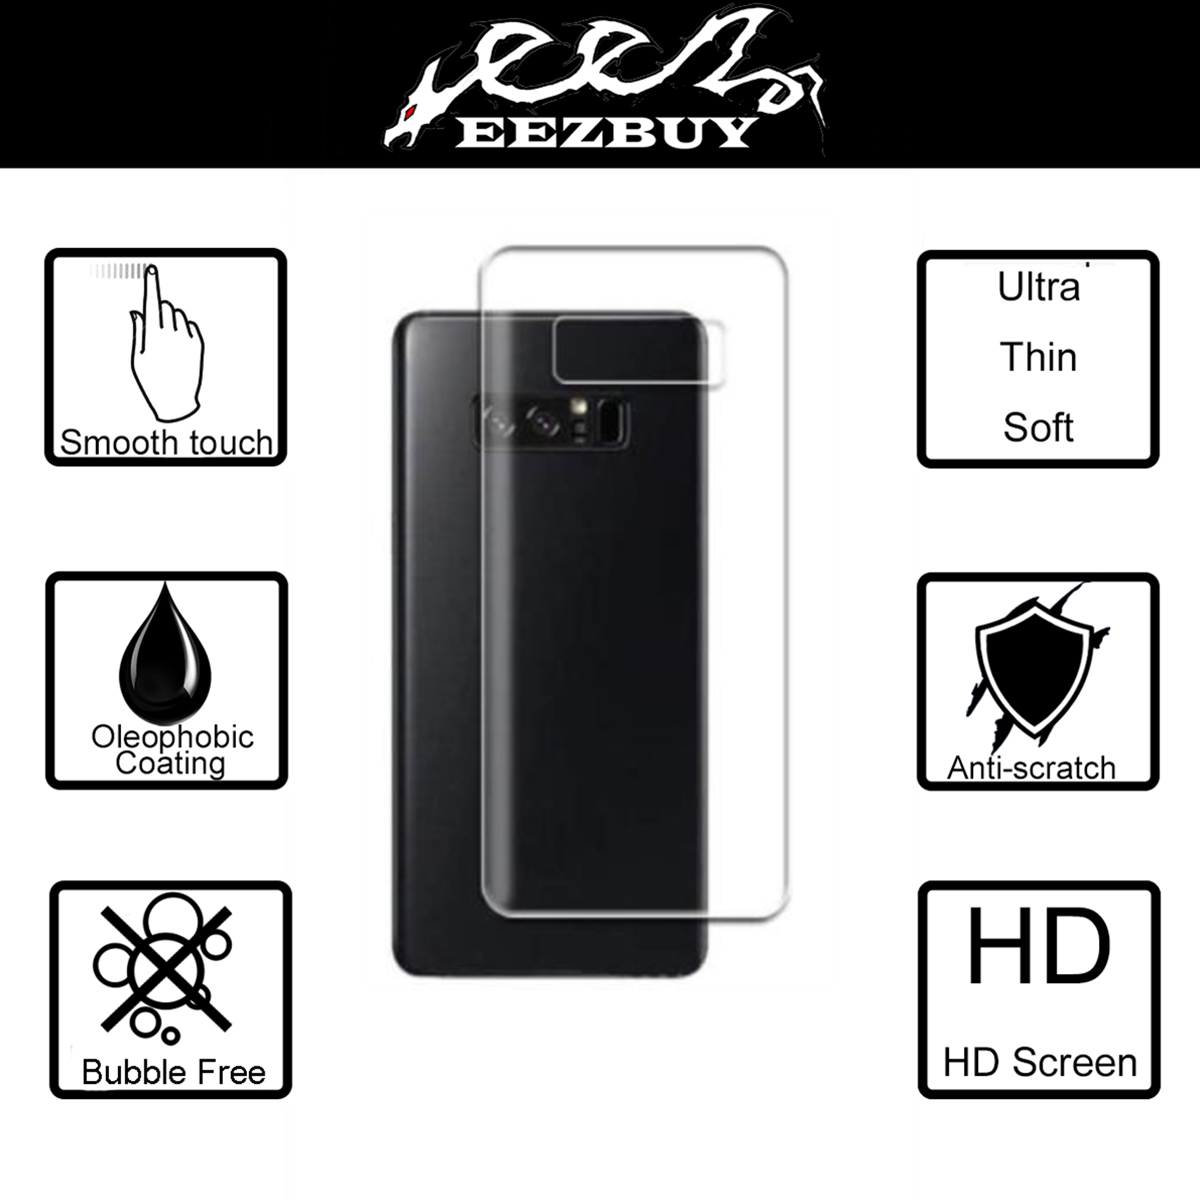 2x 3D Curved PET Soft Back Film Rear Protector for Samsung Galaxy Note 8 - $4.99